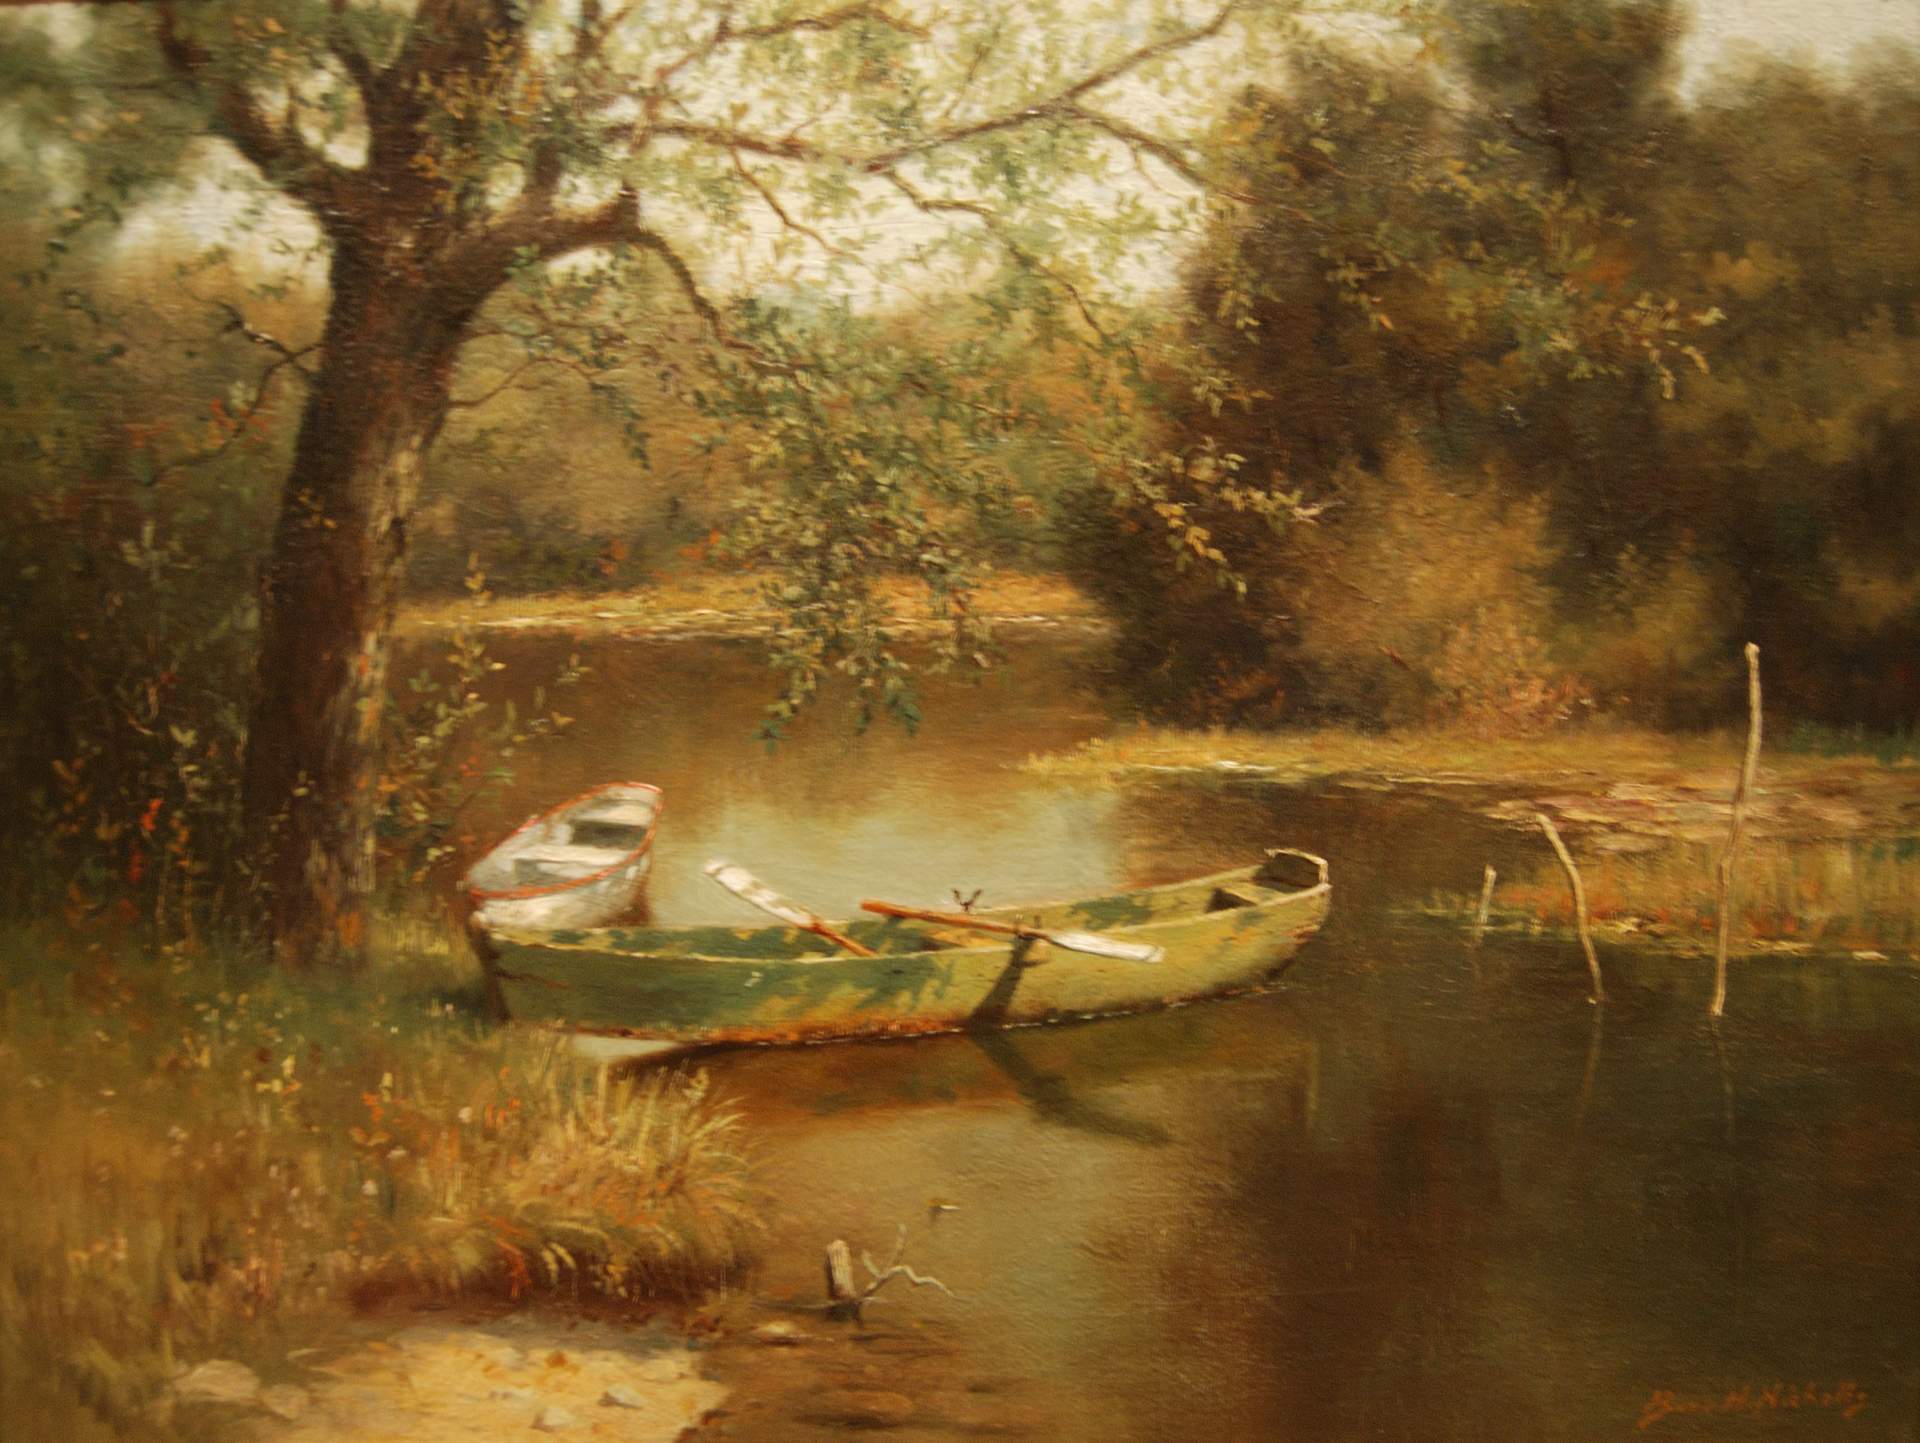 Ellicott Creek with Two Boats